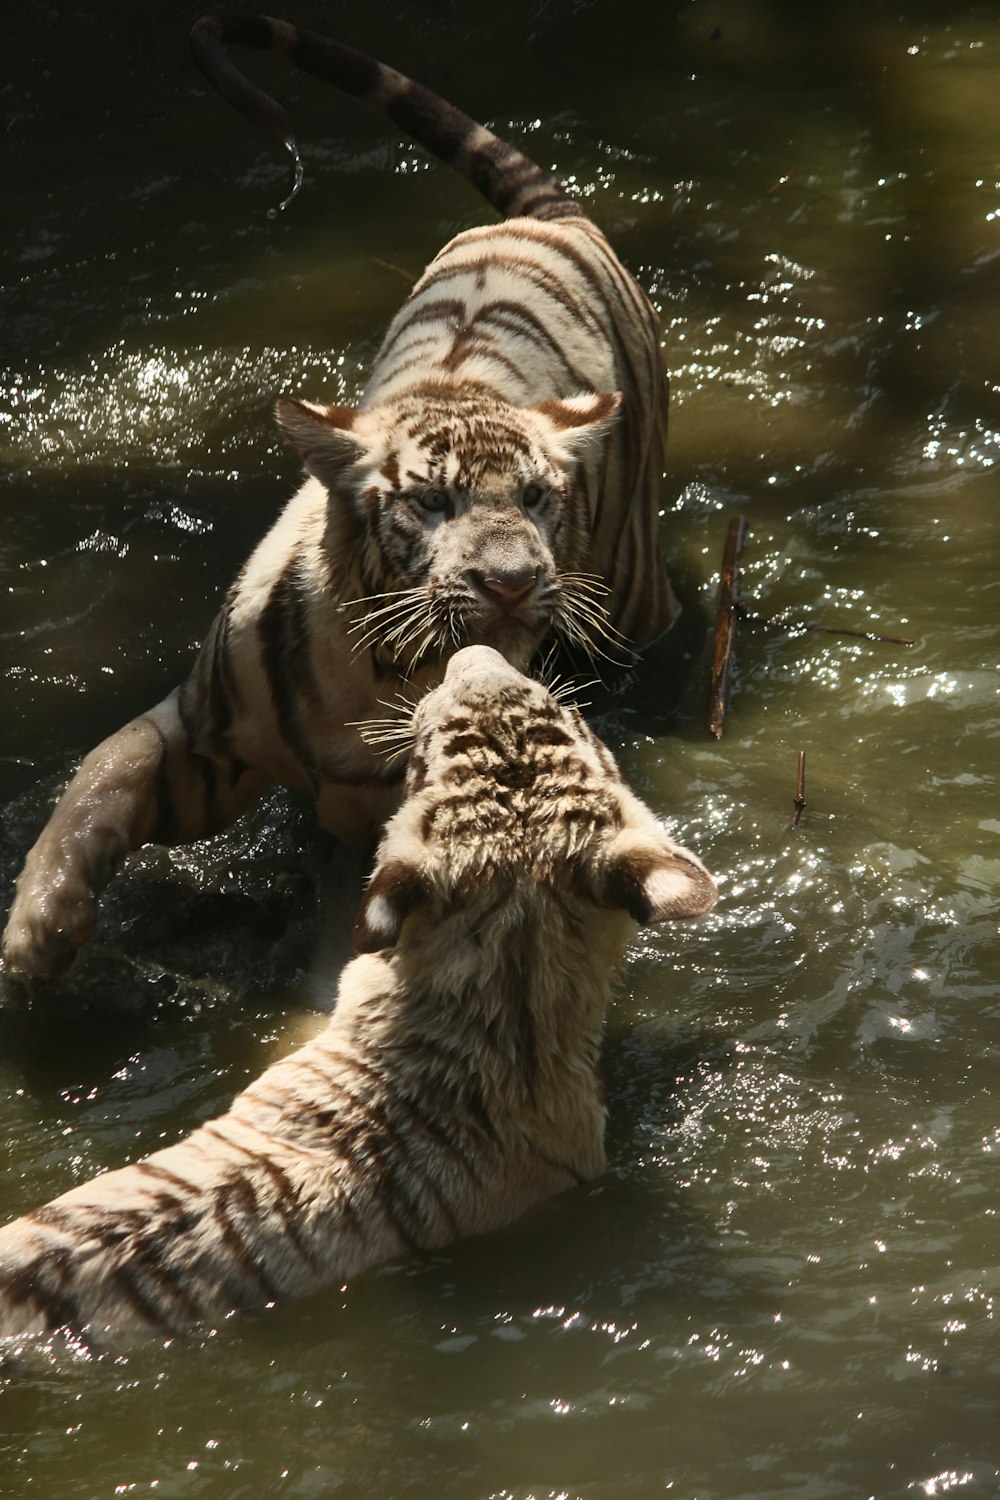 two white tigers playing in a body of water